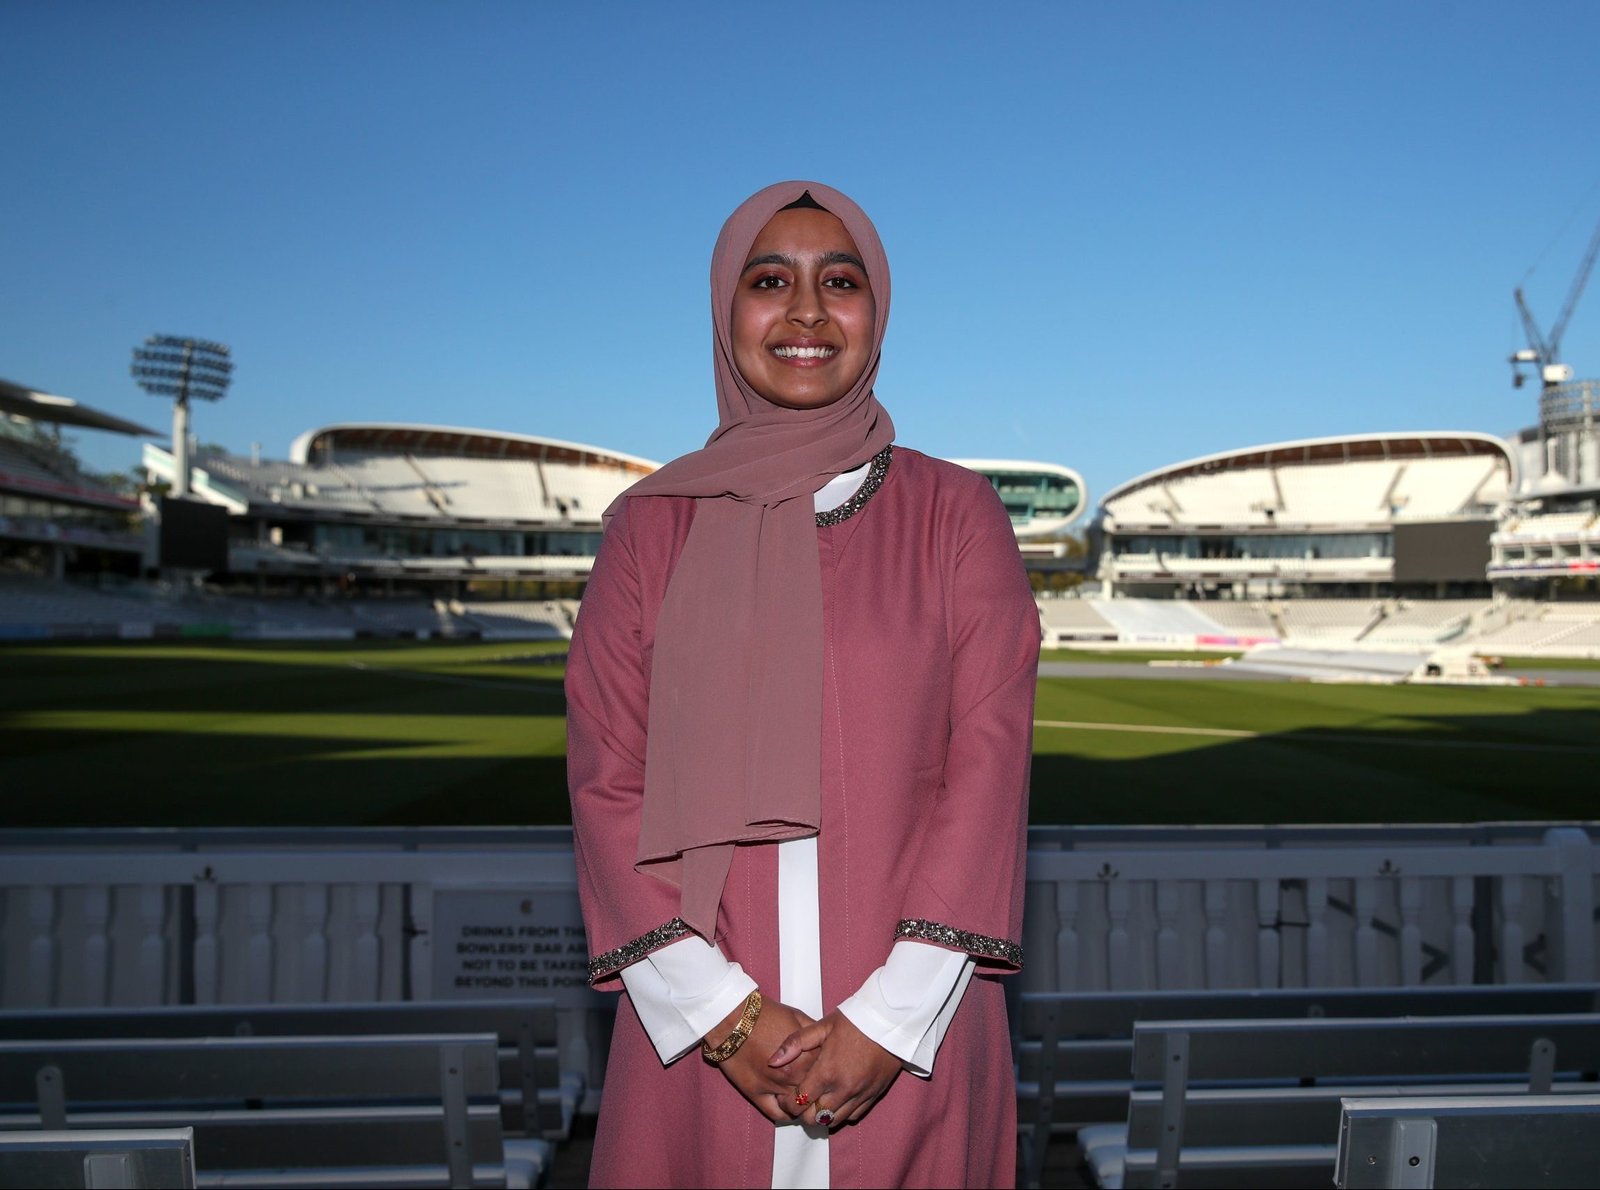 LONDON, ENGLAND - APRIL 21: A Speaker poses for a photo during ECB Ramadan Iftar at Lord's Cricket Ground on April 21, 2022 in London, England. (Photo by Luke Walker - ECB/ECB via Getty Images)